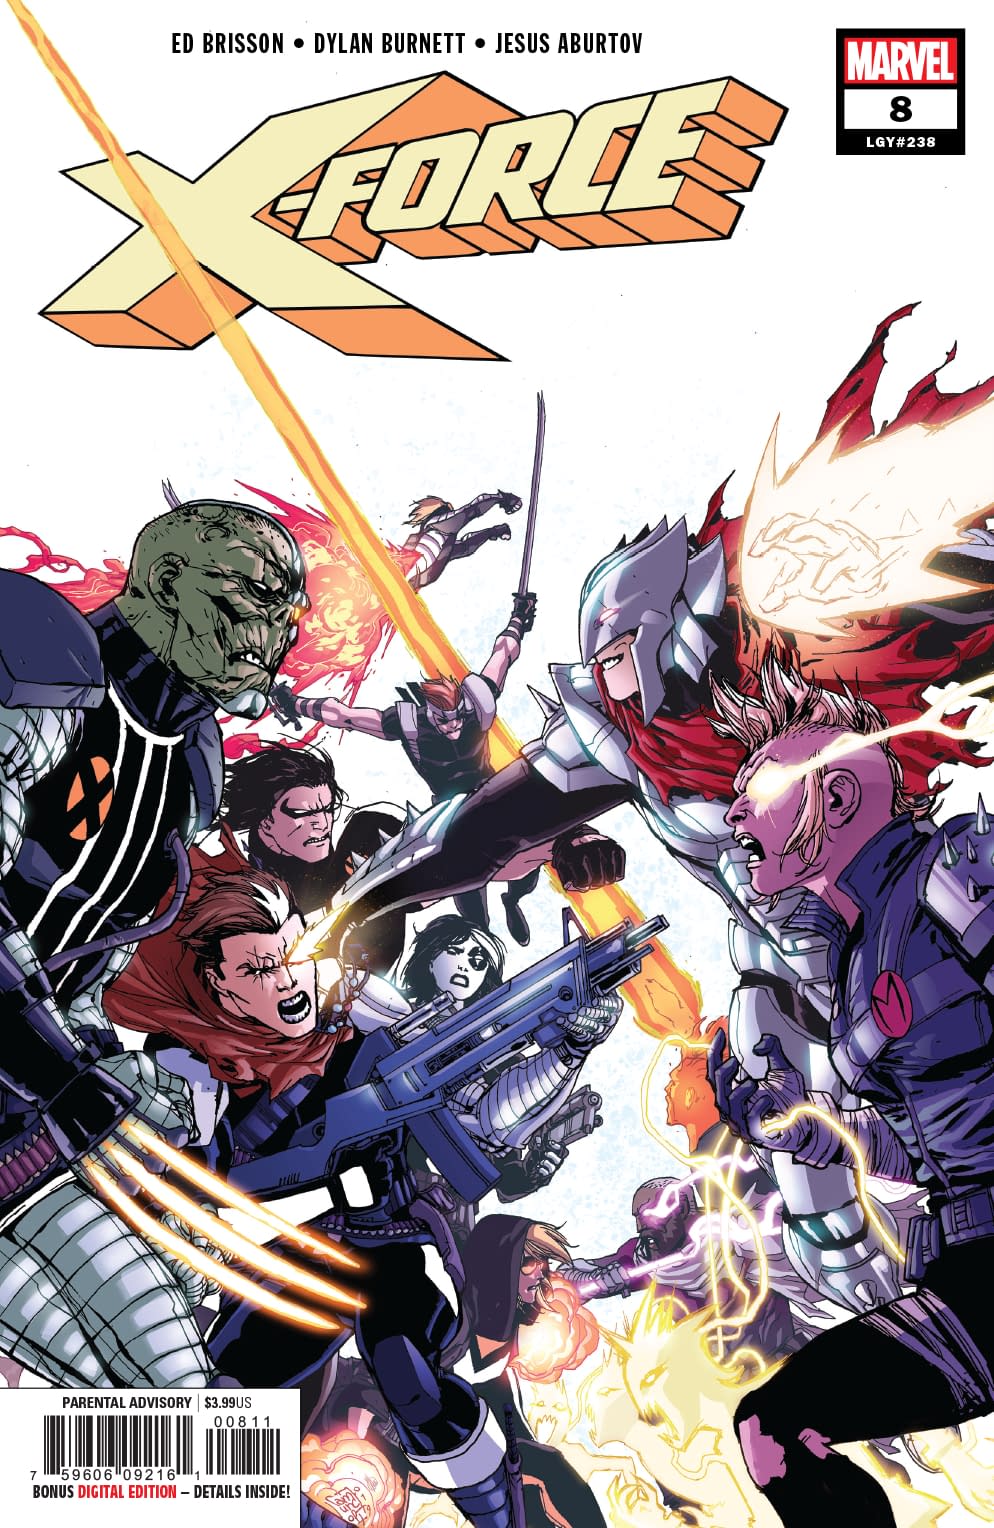 Maybe Cable Should Get That Checked Out? X-Force #8 Preview